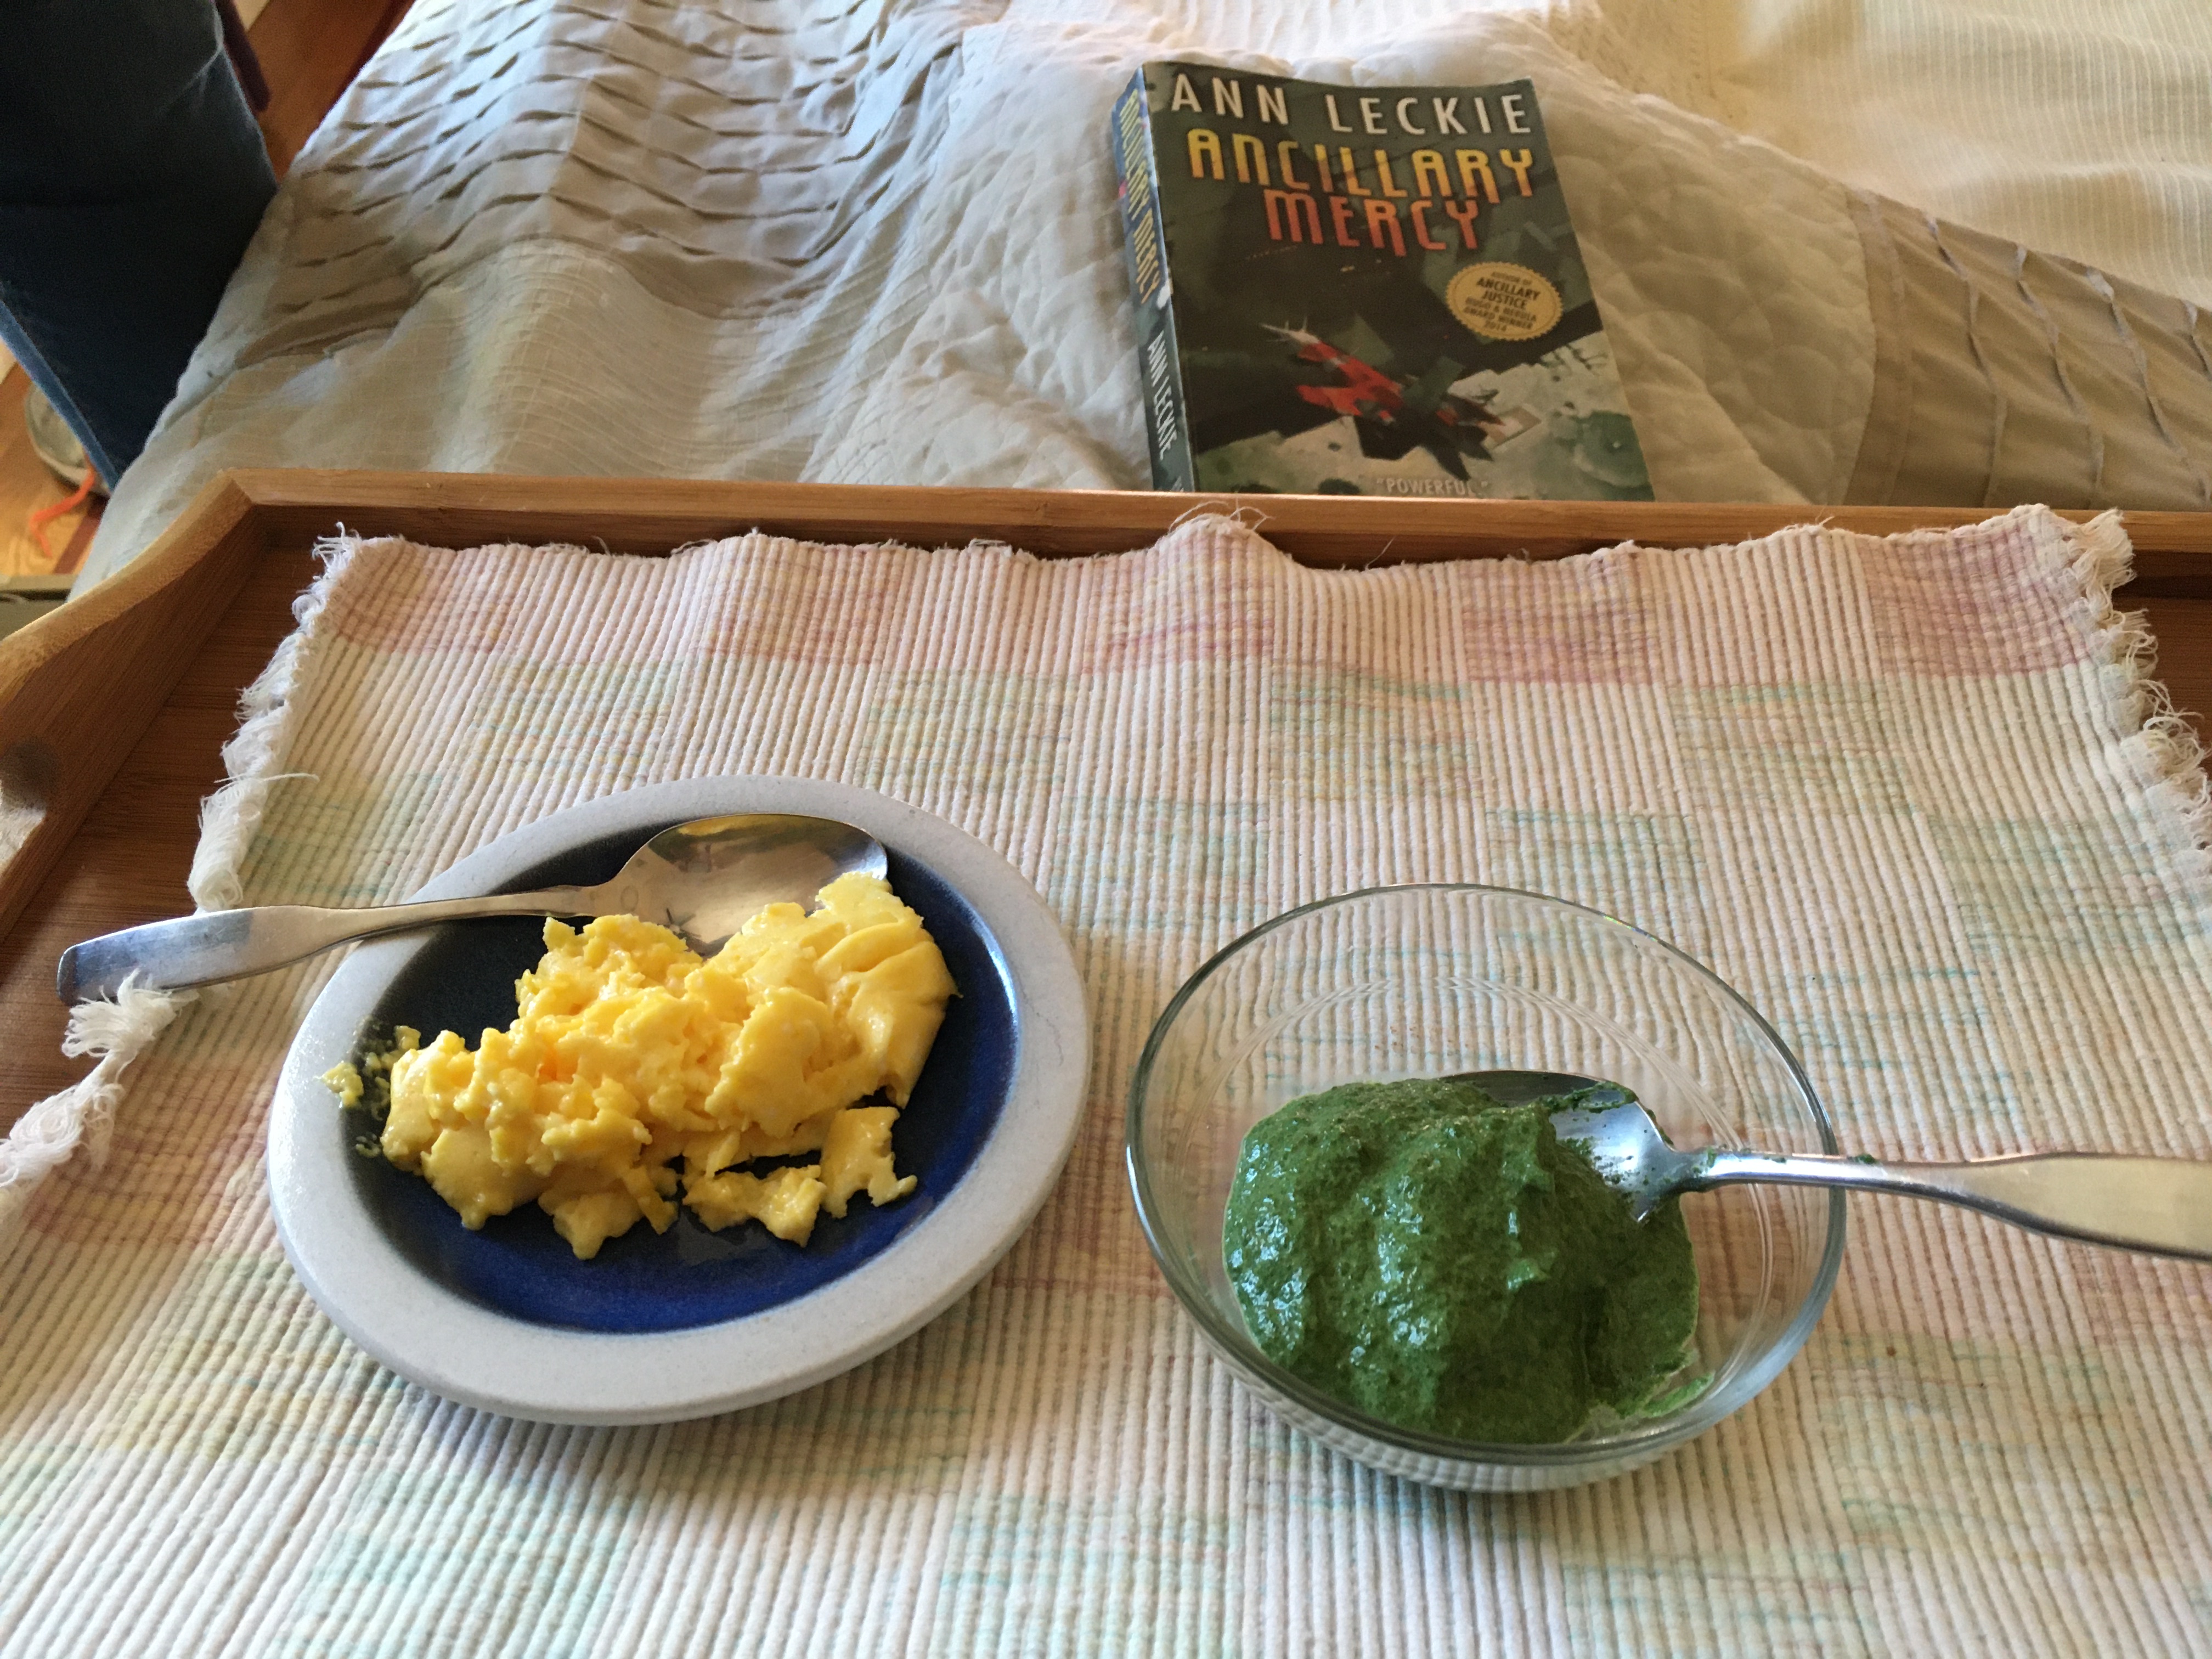 A food tray with two items: small plate of scrambled eggs, small bowl of creamed spinach. A book Ancillary Justice is in the background.